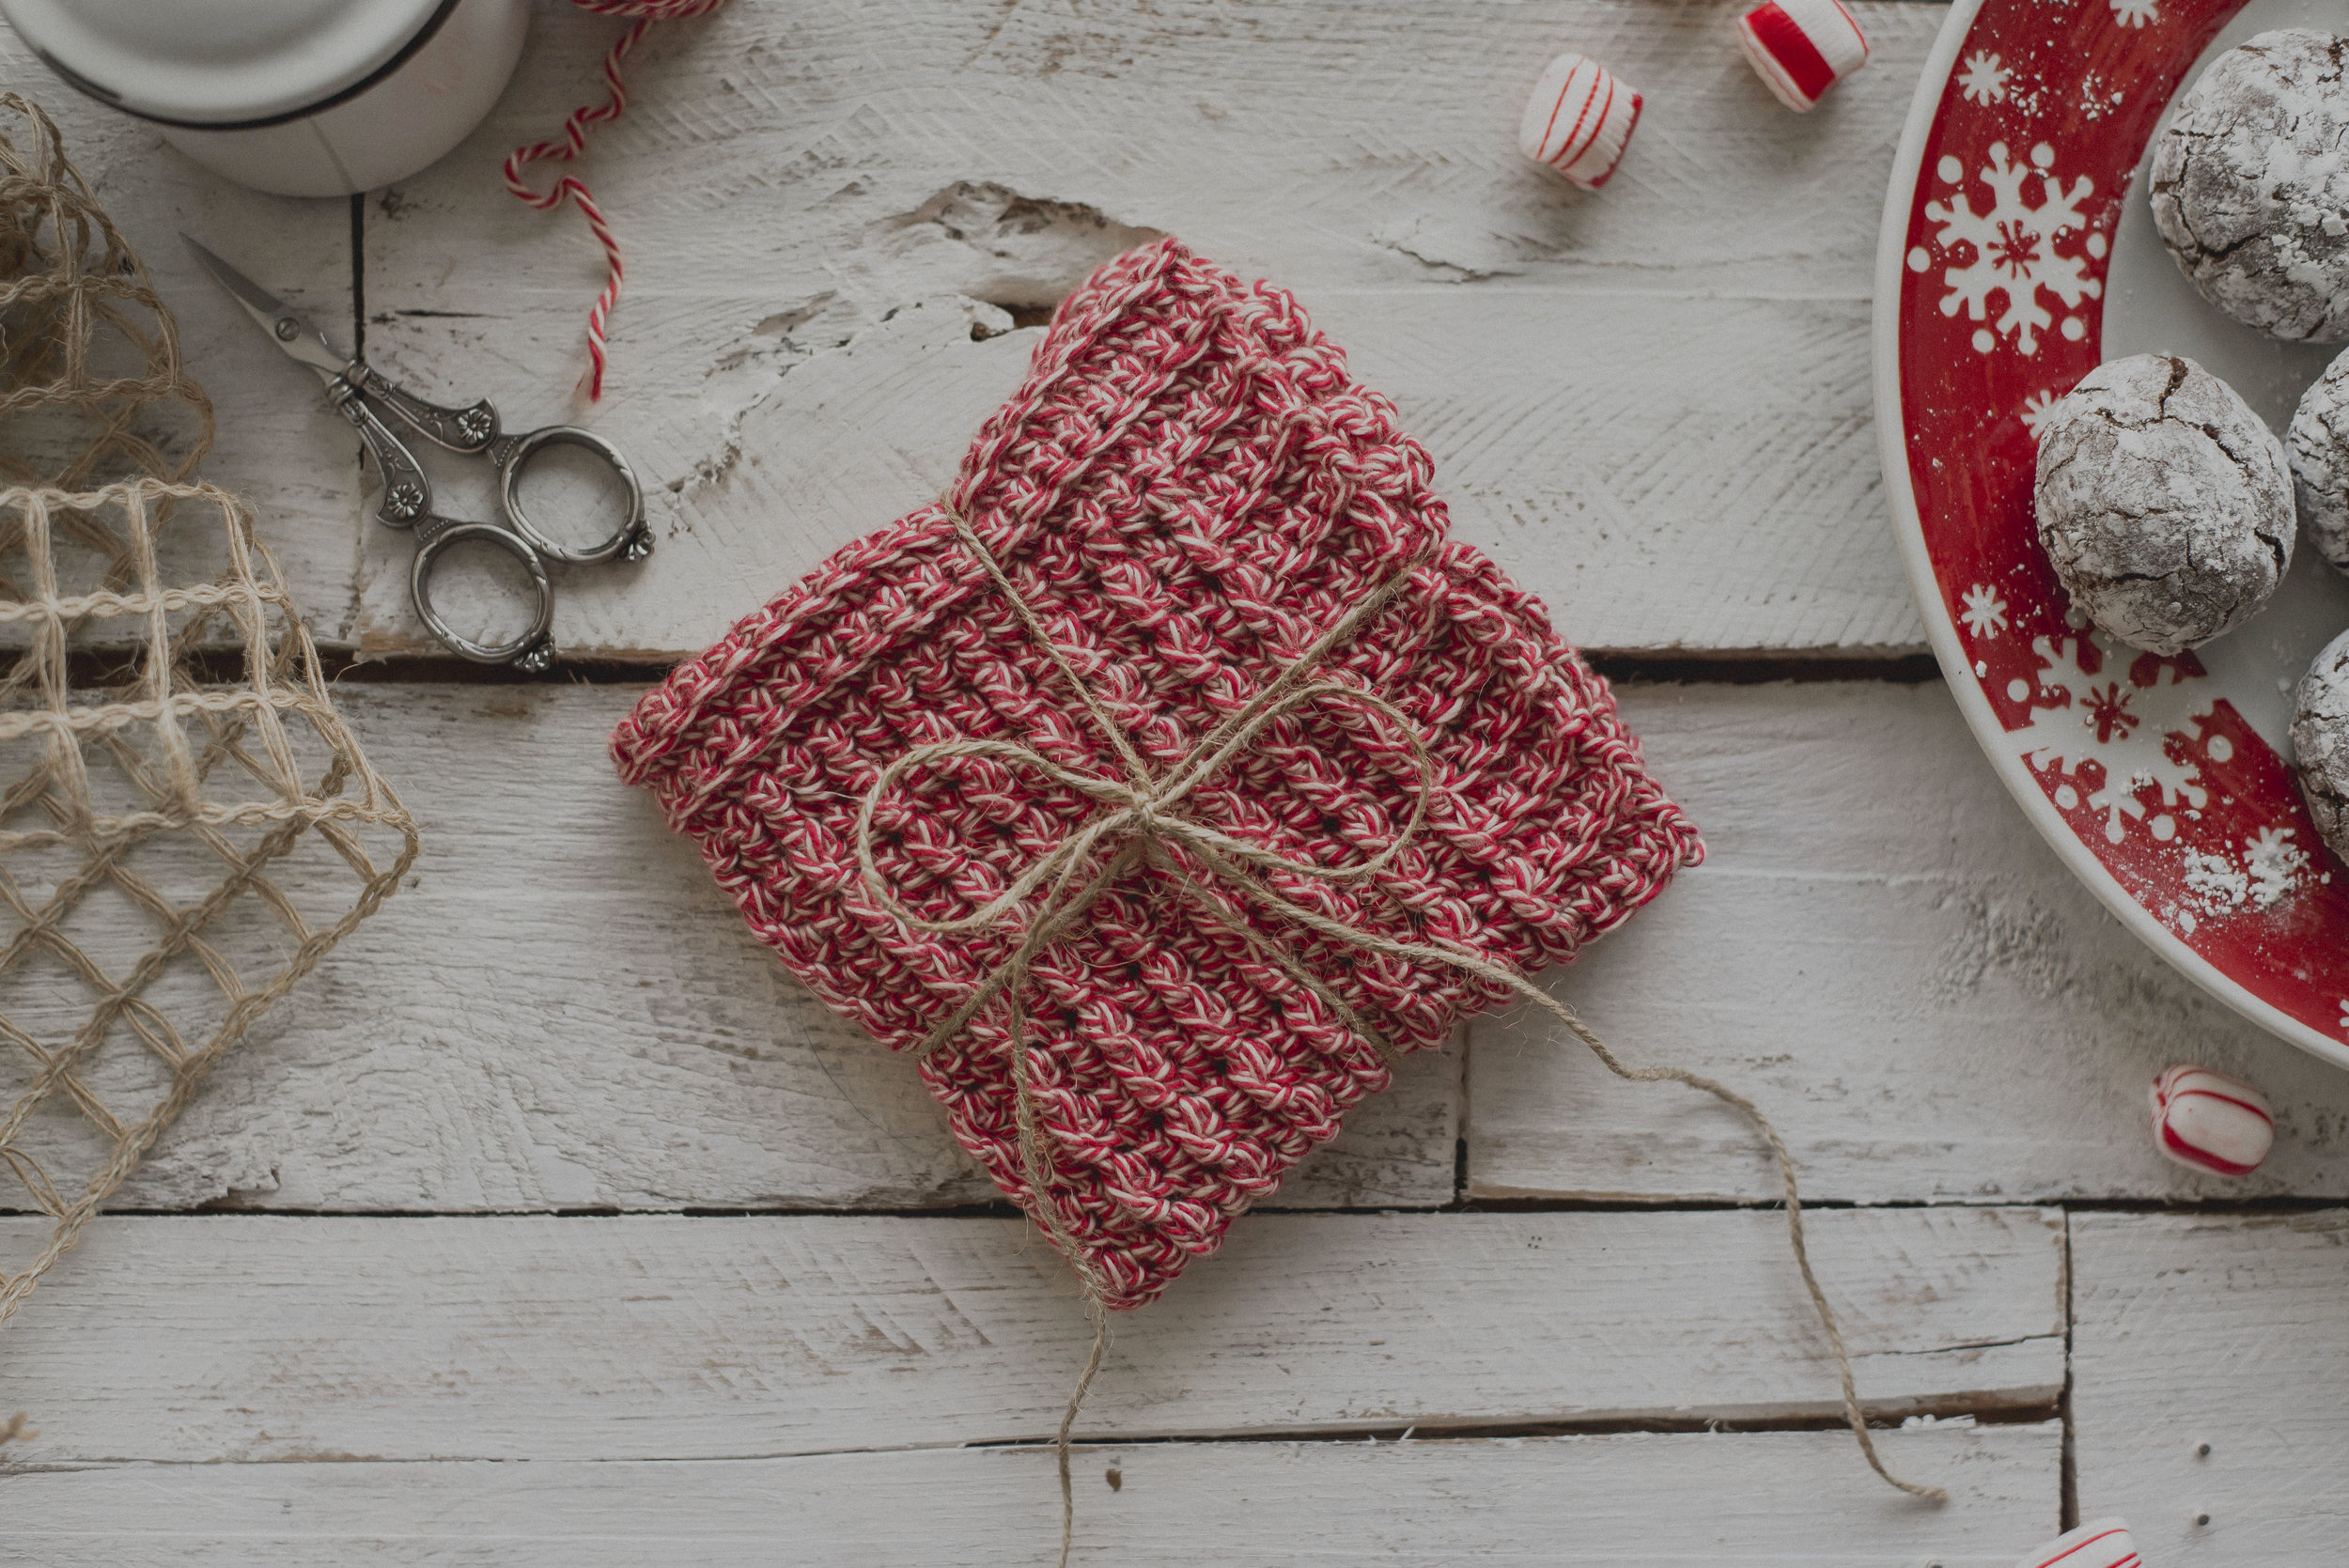 Free Crochet Pattern for the Peppermint Washcloth — Megmade with Love